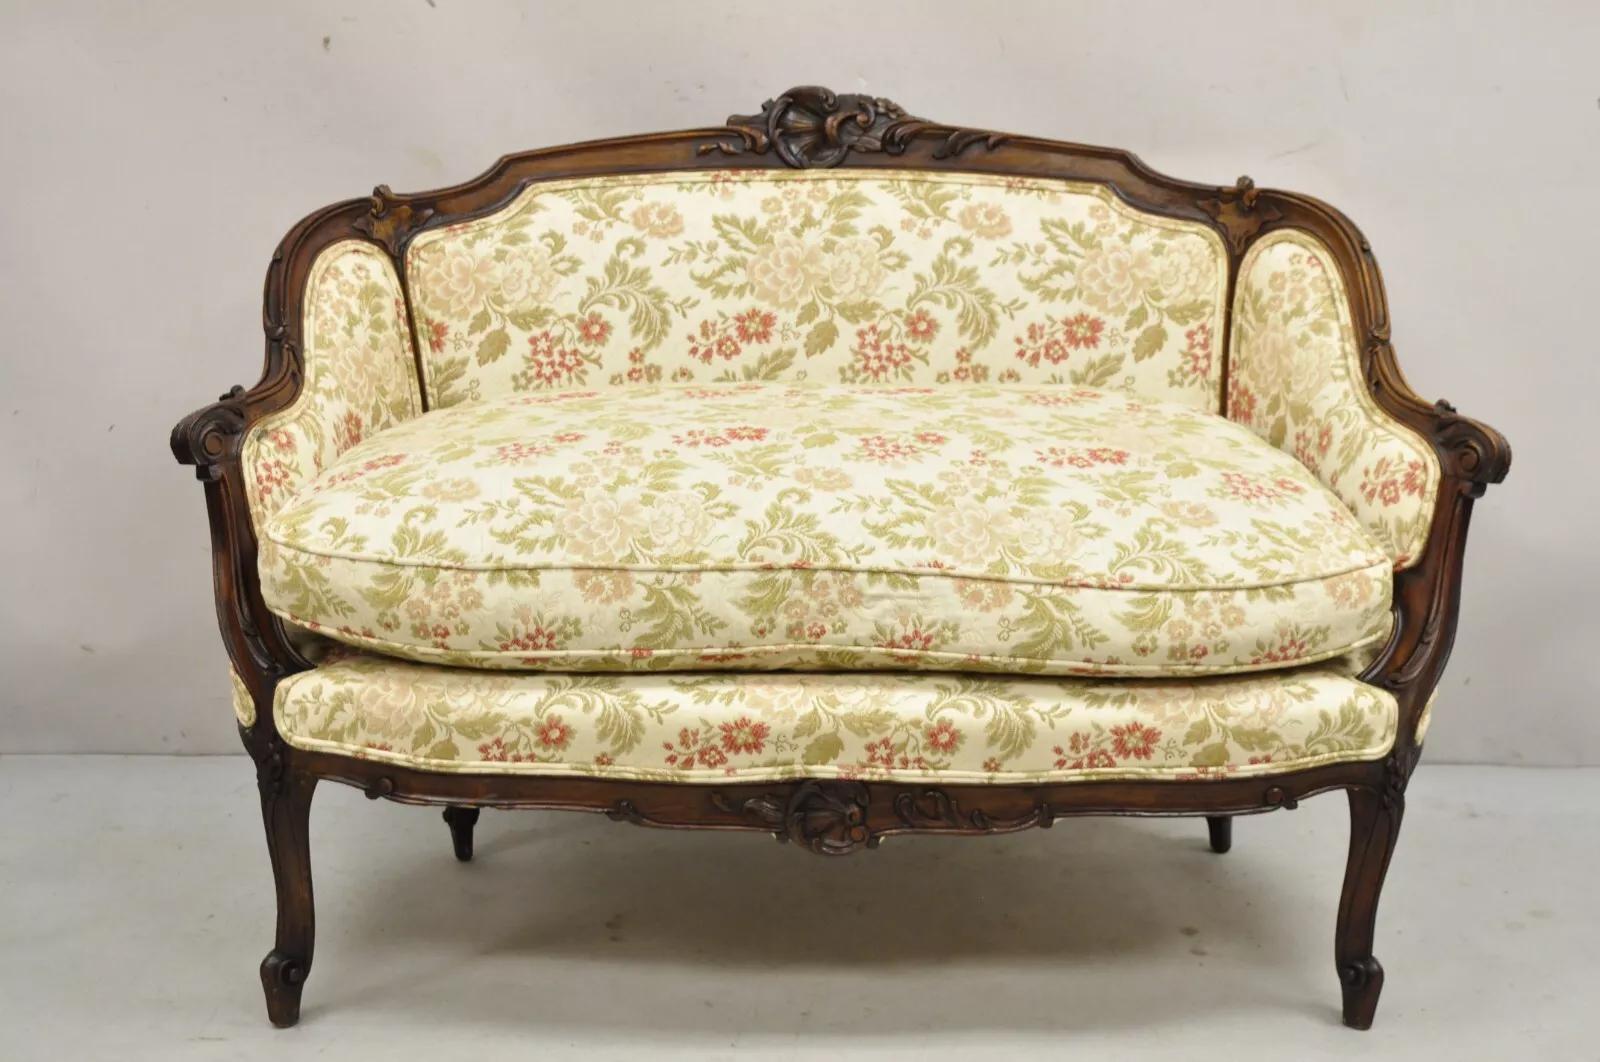 Antique French Louis XV Style Carved Walnut Small Loveseat Settee Sofa. Circa Early 20th Century. Measurements: 32